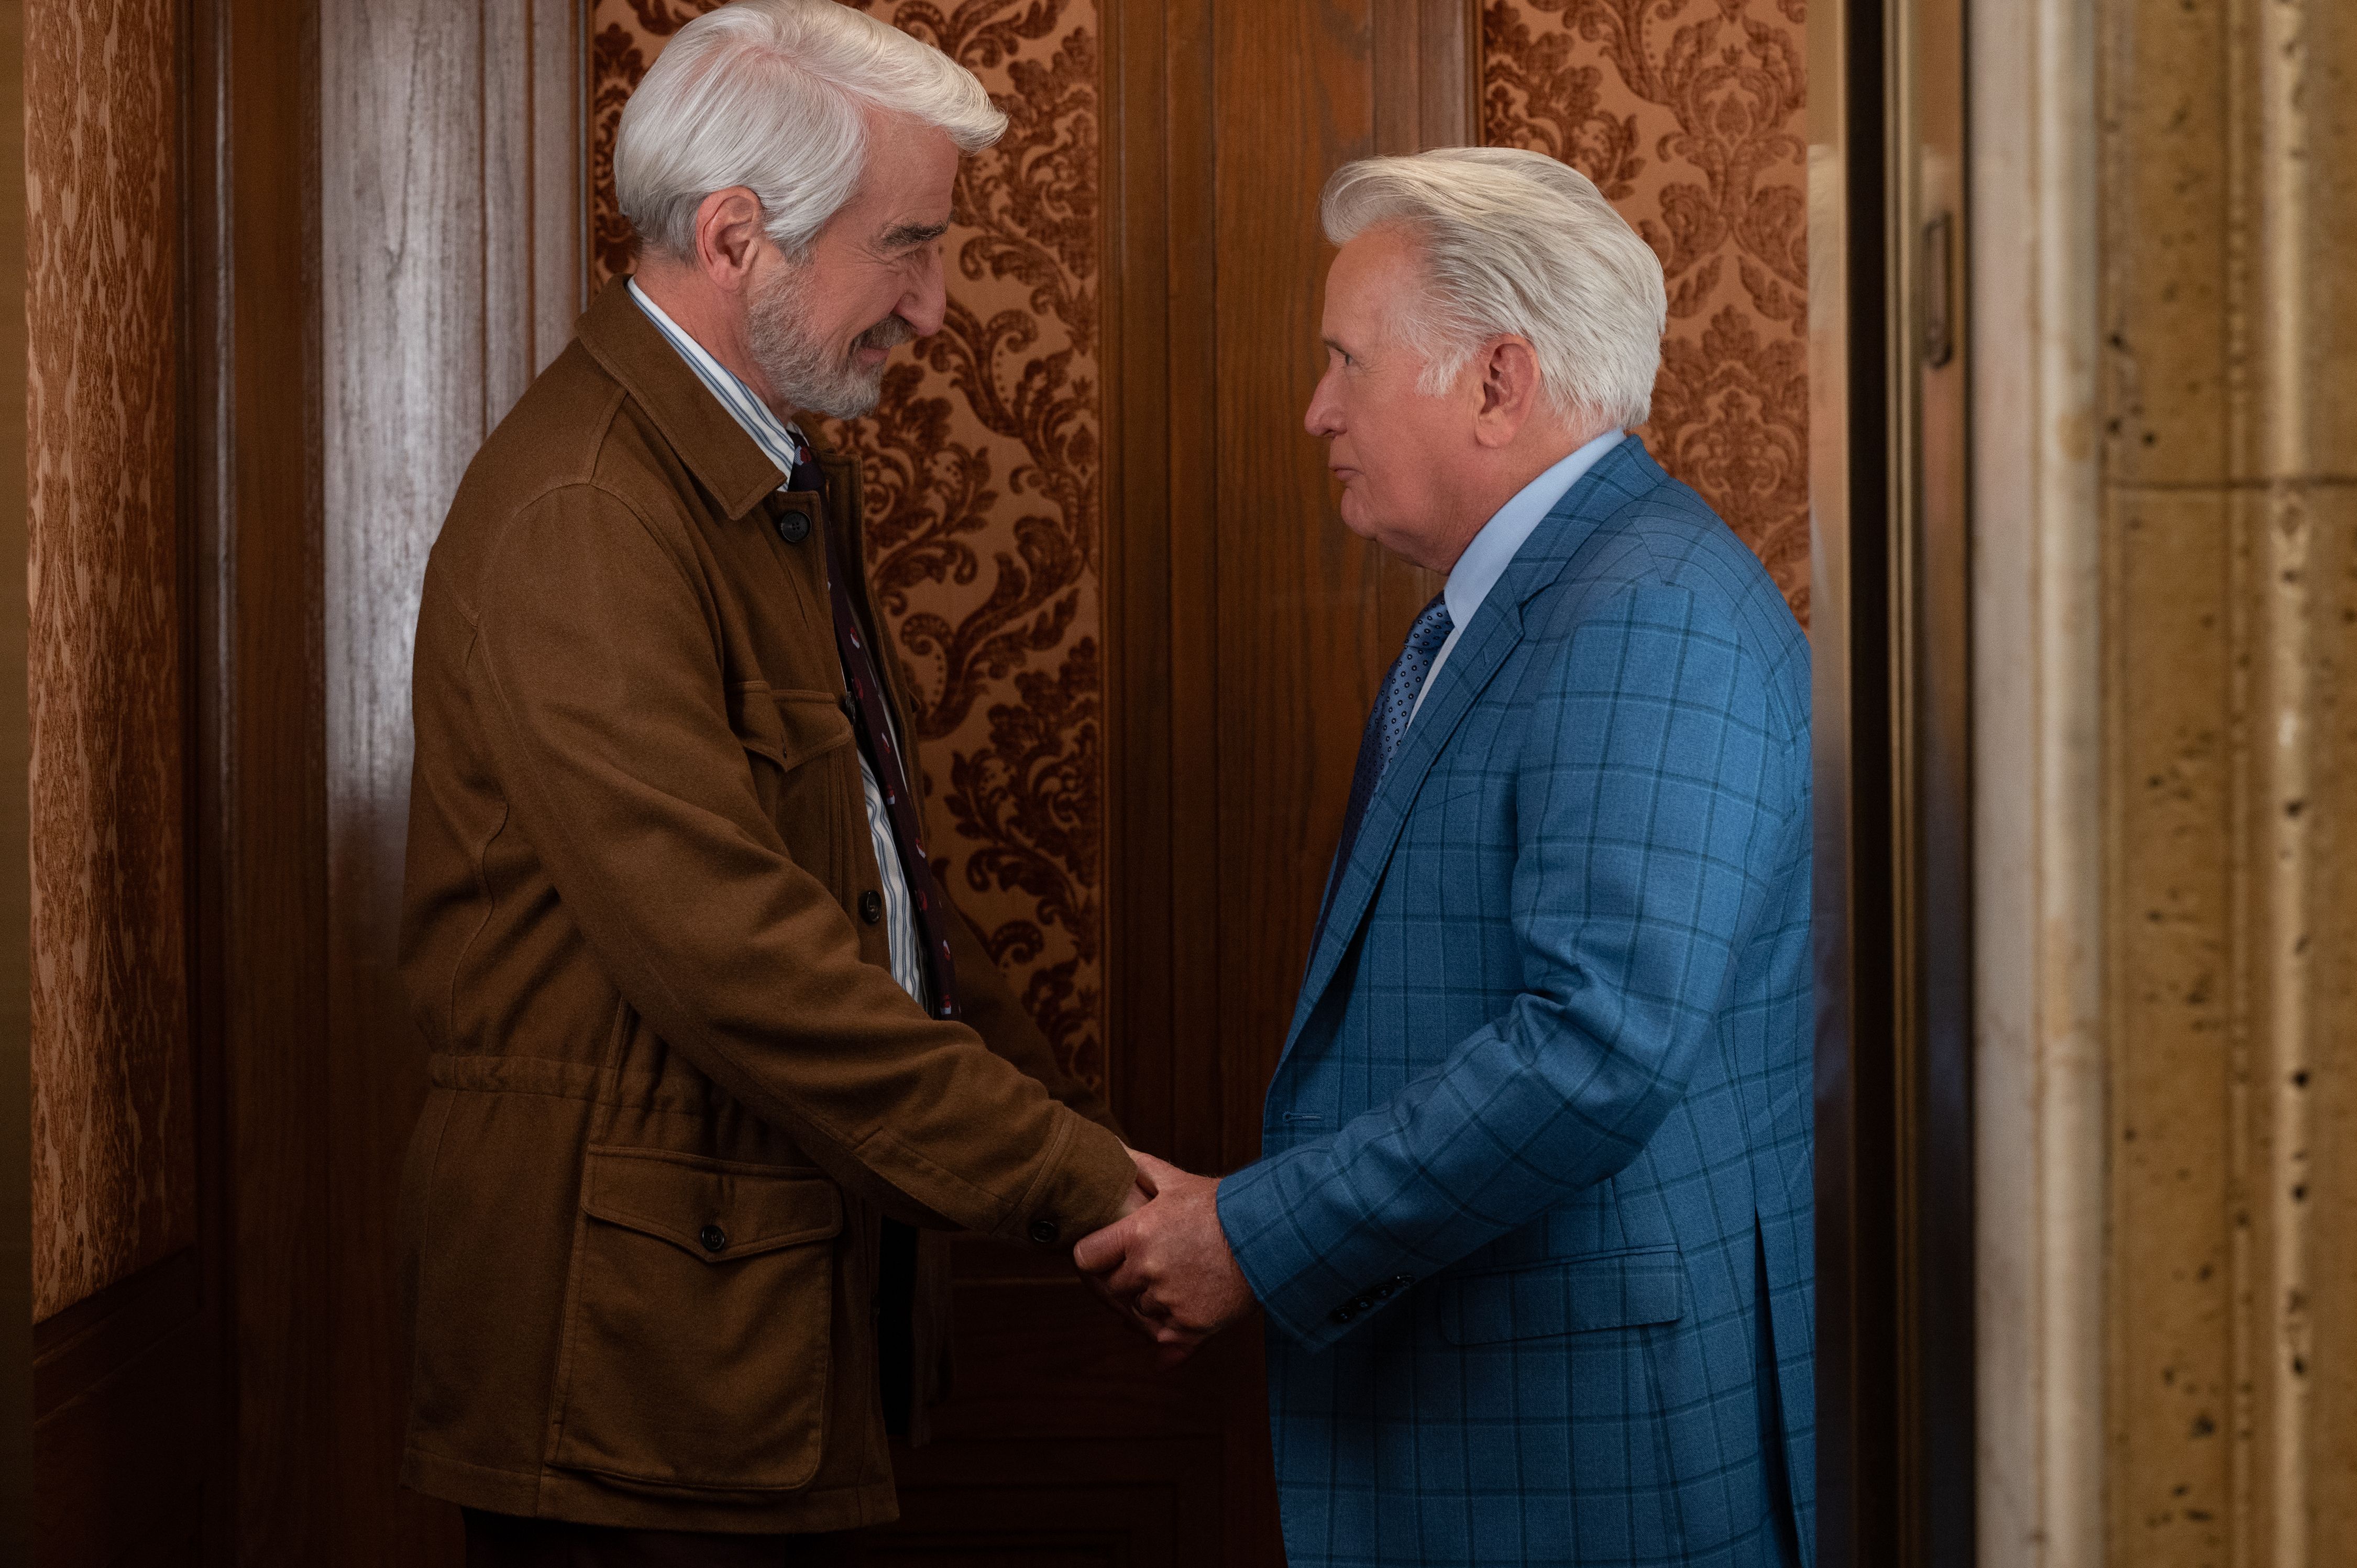 Sam Waterston and Martin Sheen in Grace and Frankie season 7